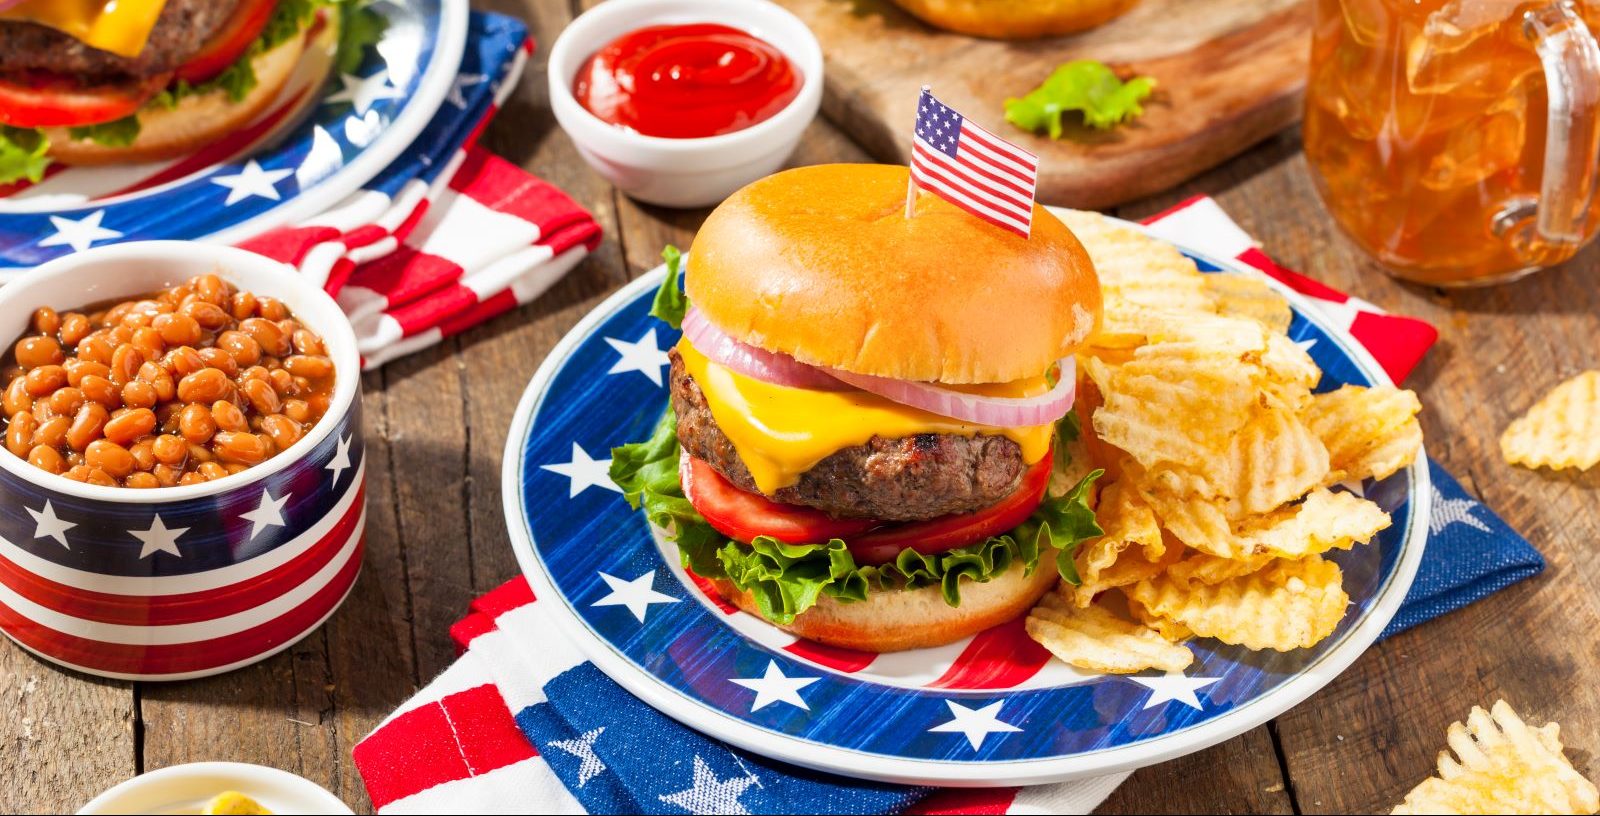 Shane Joy, PA, family medicine specialist, shares four tips so you can indulge in a guilt-free barbecue this Fourth of July.